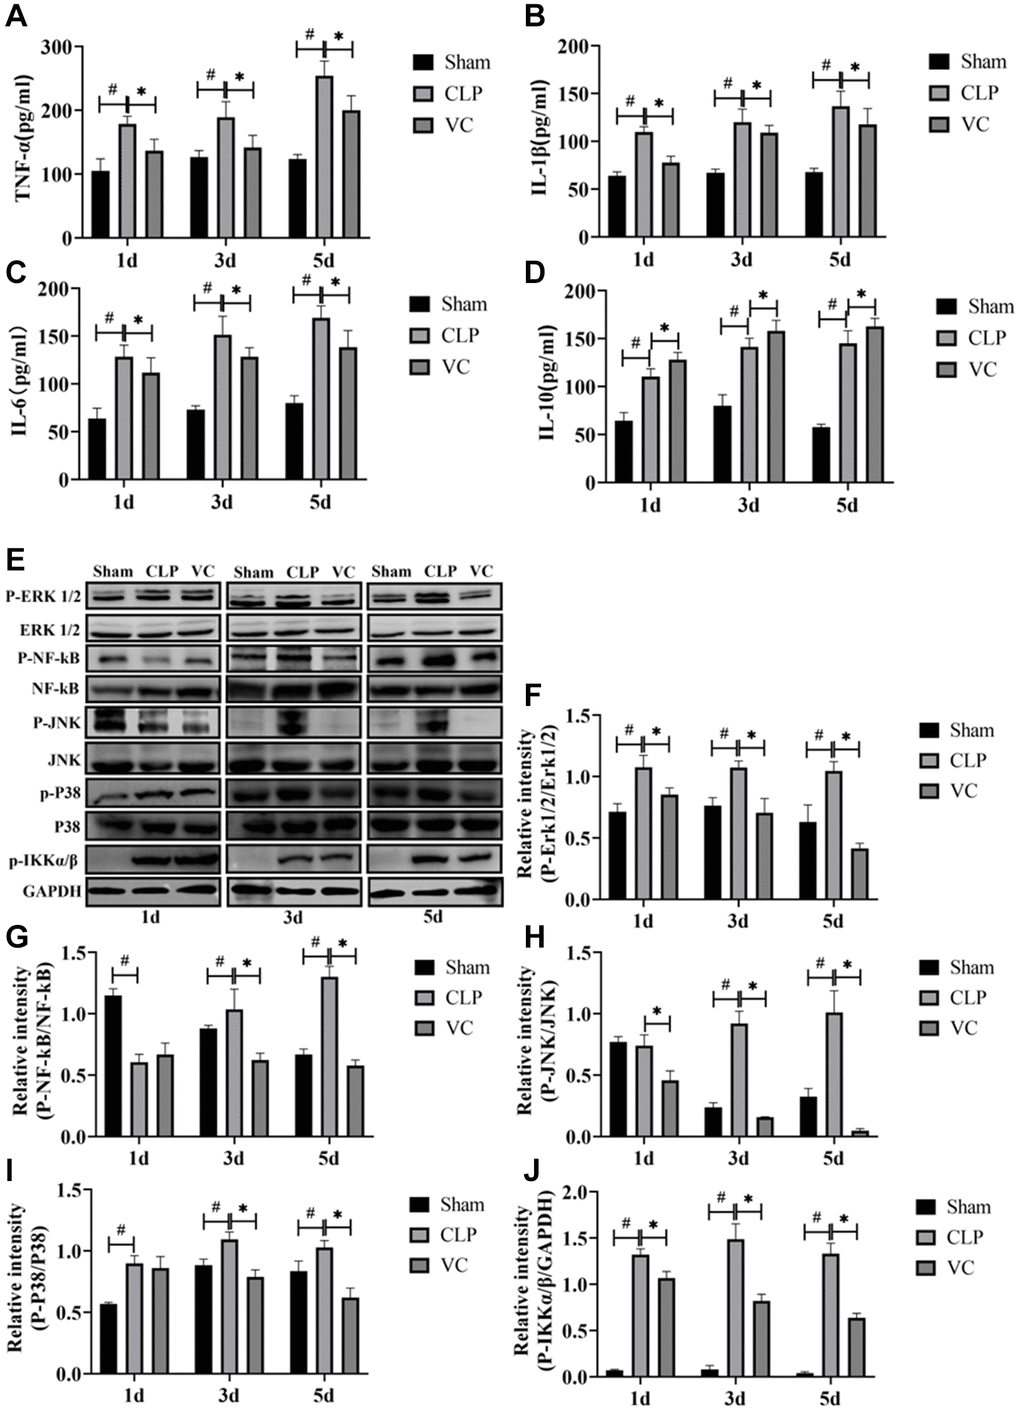 High-dose VC attenuated the inflammatory response in CLP-induced sepsis rats at 1d, 3d and 5d. (A–D) The serum inflammatory cytokines (i.e., TNF-α, IL-1β, IL-6, and IL-10) in serum were measured by ELISA. (E–J) Representative images of phosphorylation levels of P38, Erk1/2, JNK, NF-κB and IKK α/β were examined by western blot and the fold activation data analysis. Data are expressed as mean ± SD (at least n = 6/group), #p *p 